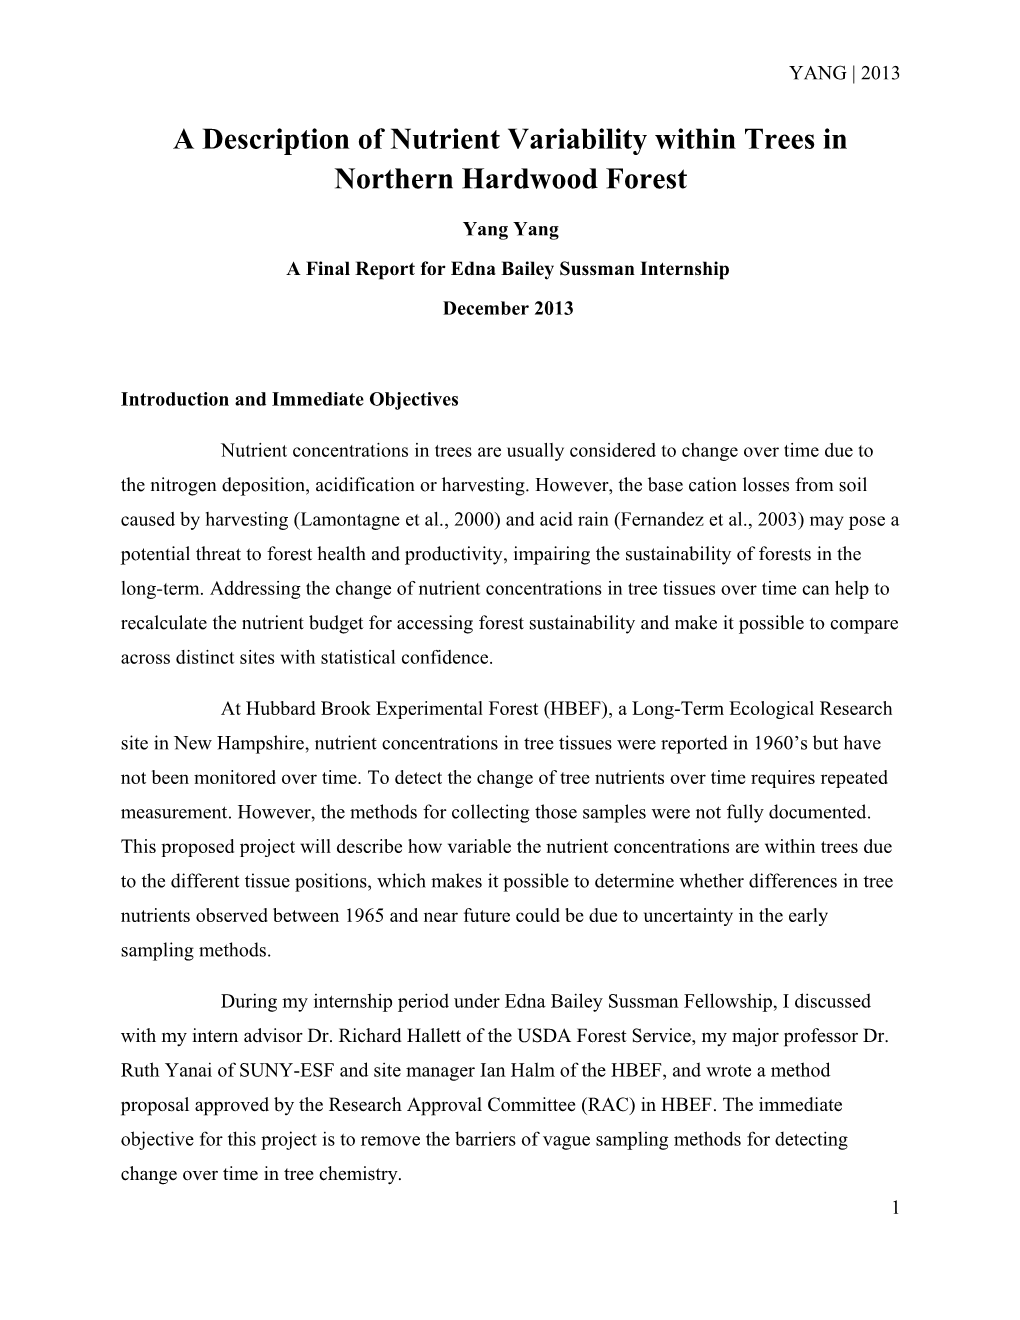 A Description of Nutrient Variability Within Trees in Northern Hardwood Forest